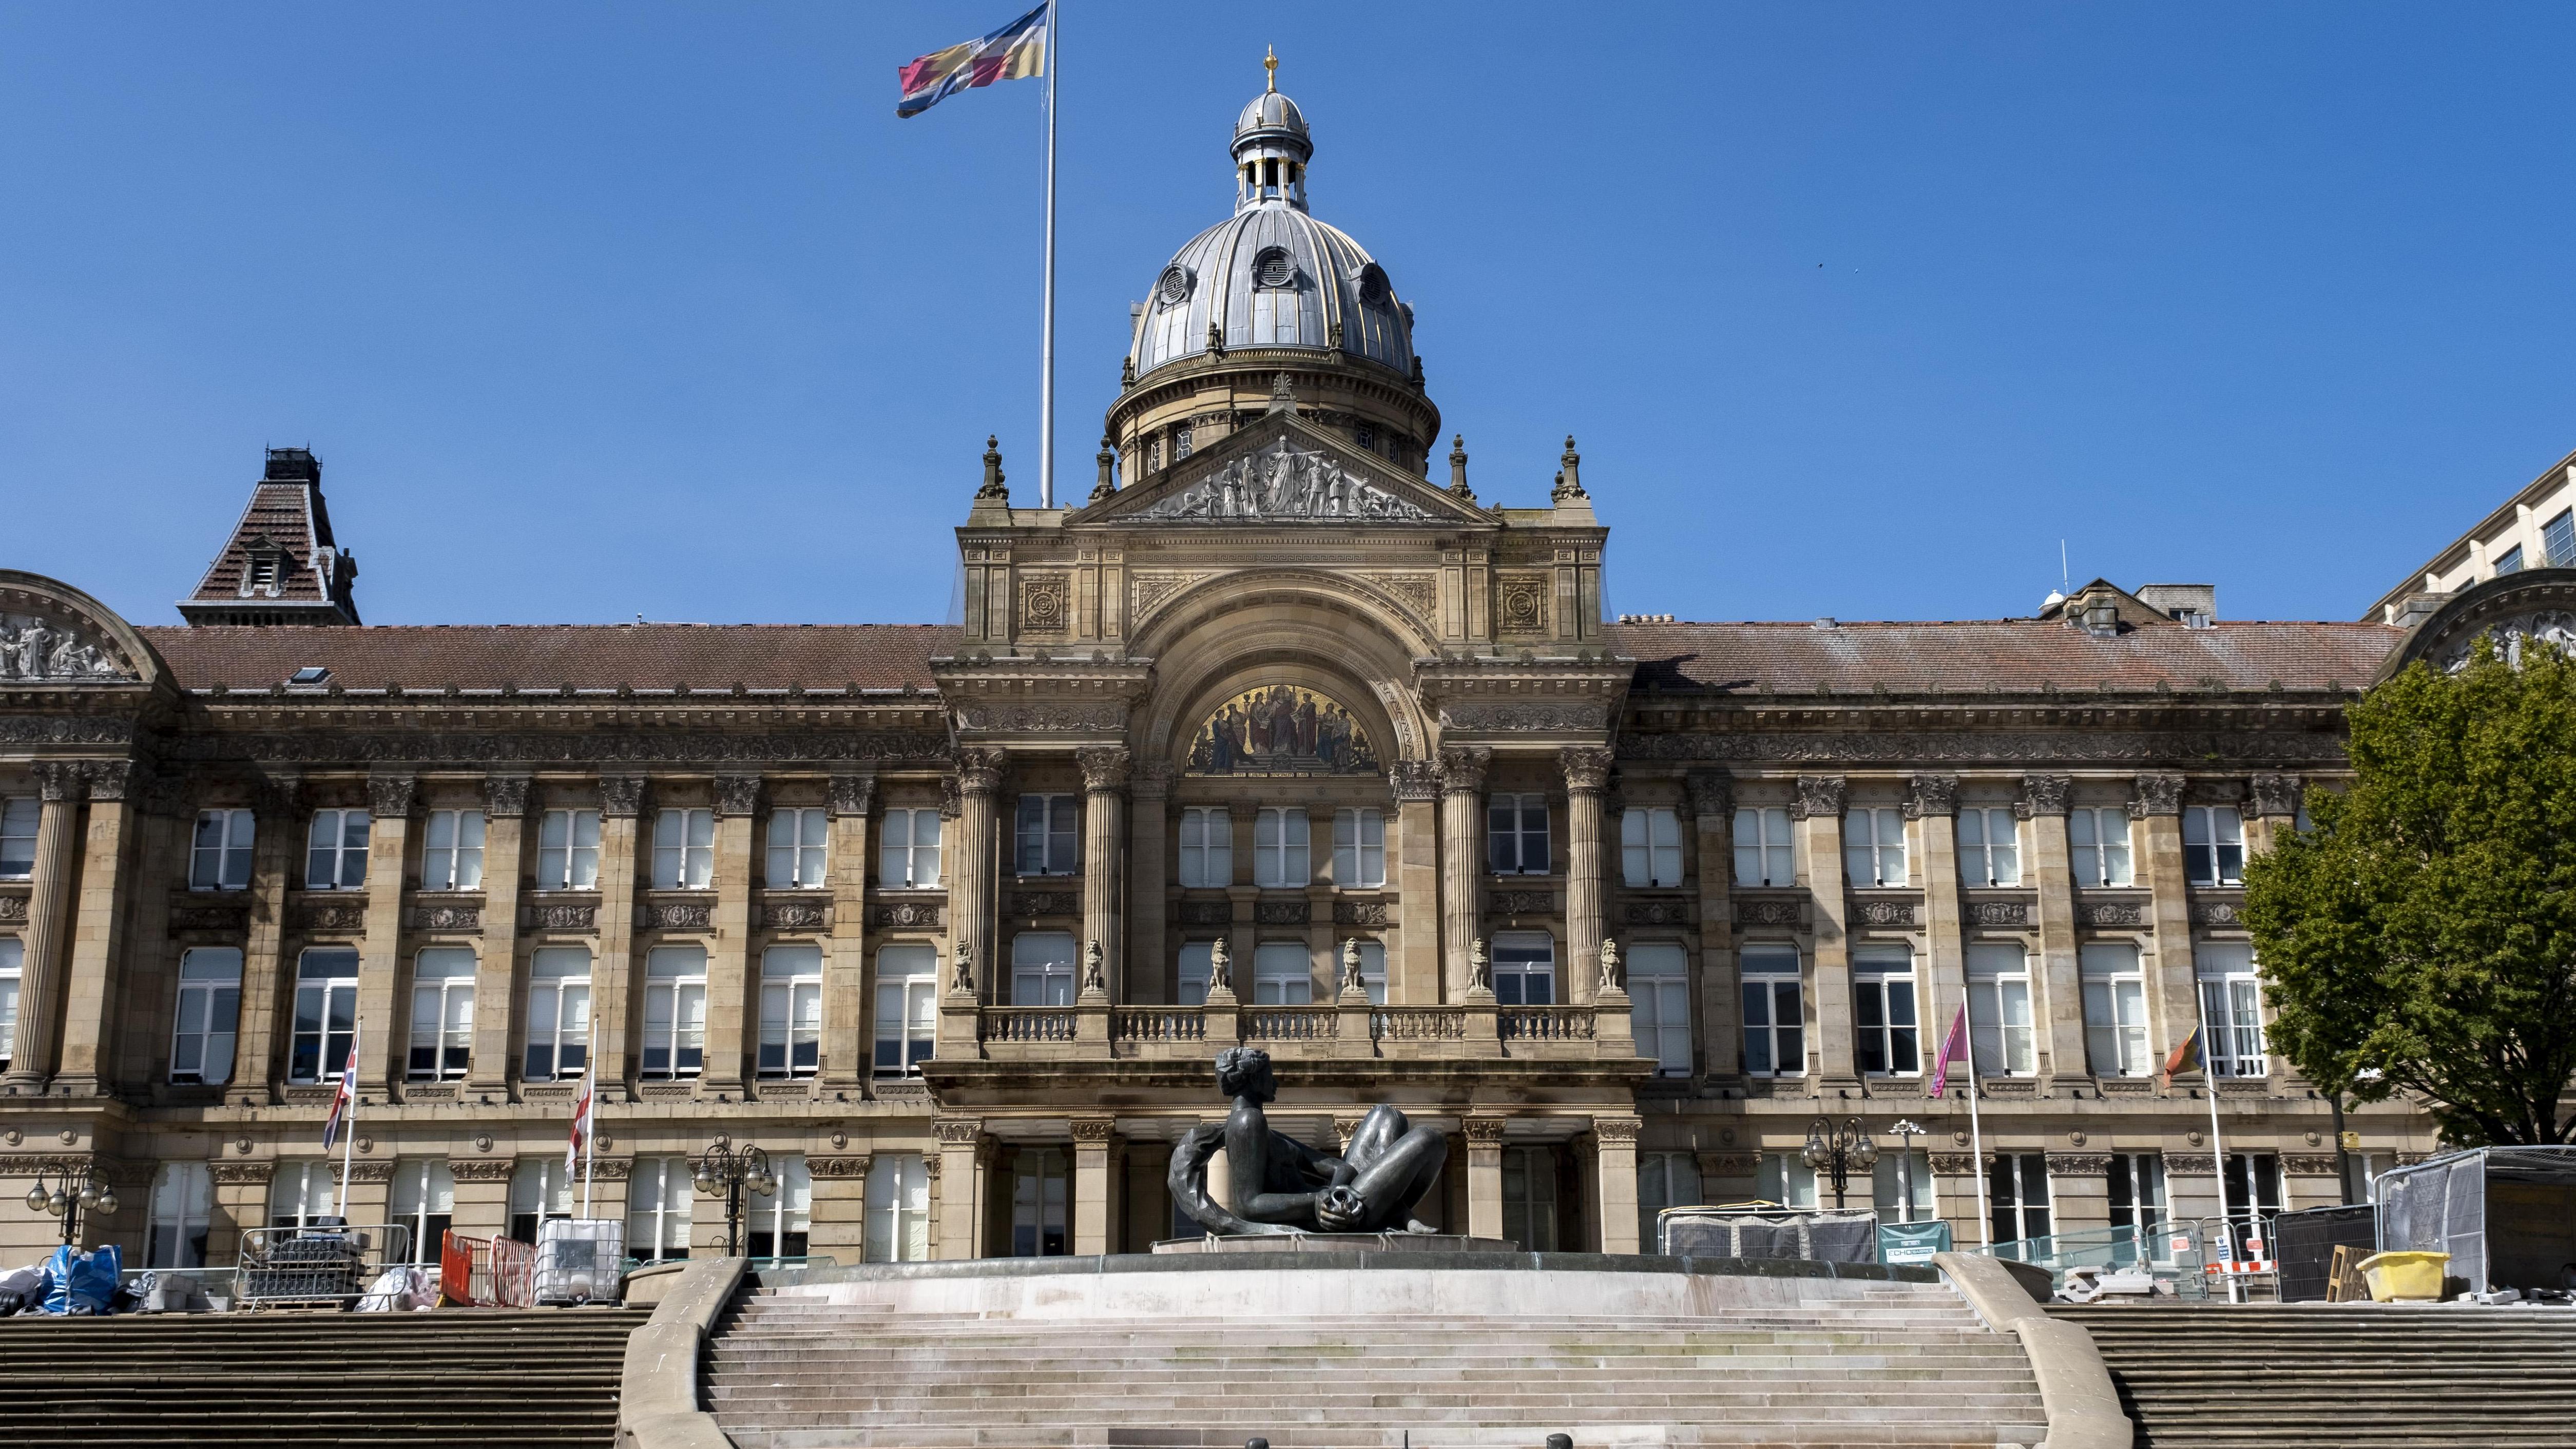 Bankrupt Birmingham may have to sell libraries and art galleries